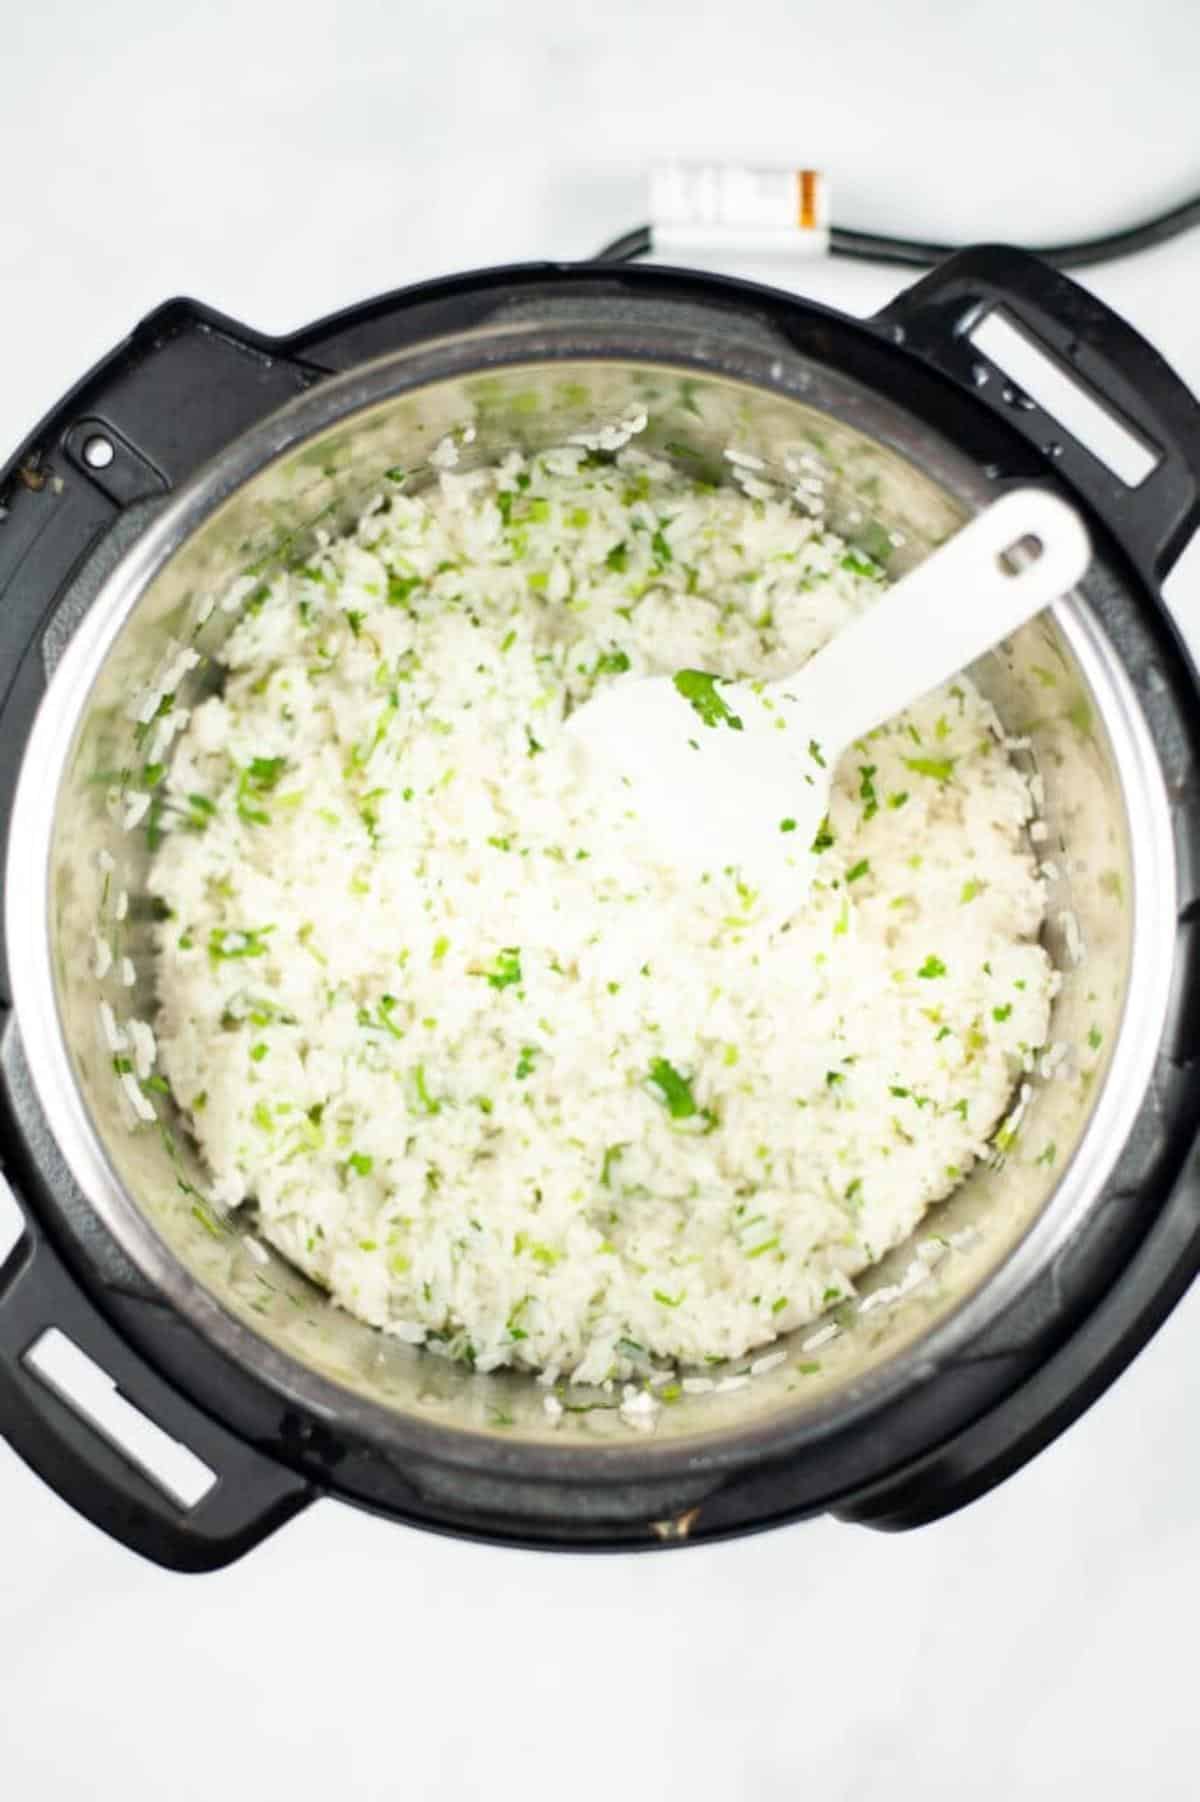 A white spoon in the instant pot to stir the copycat cilantro lime rice.